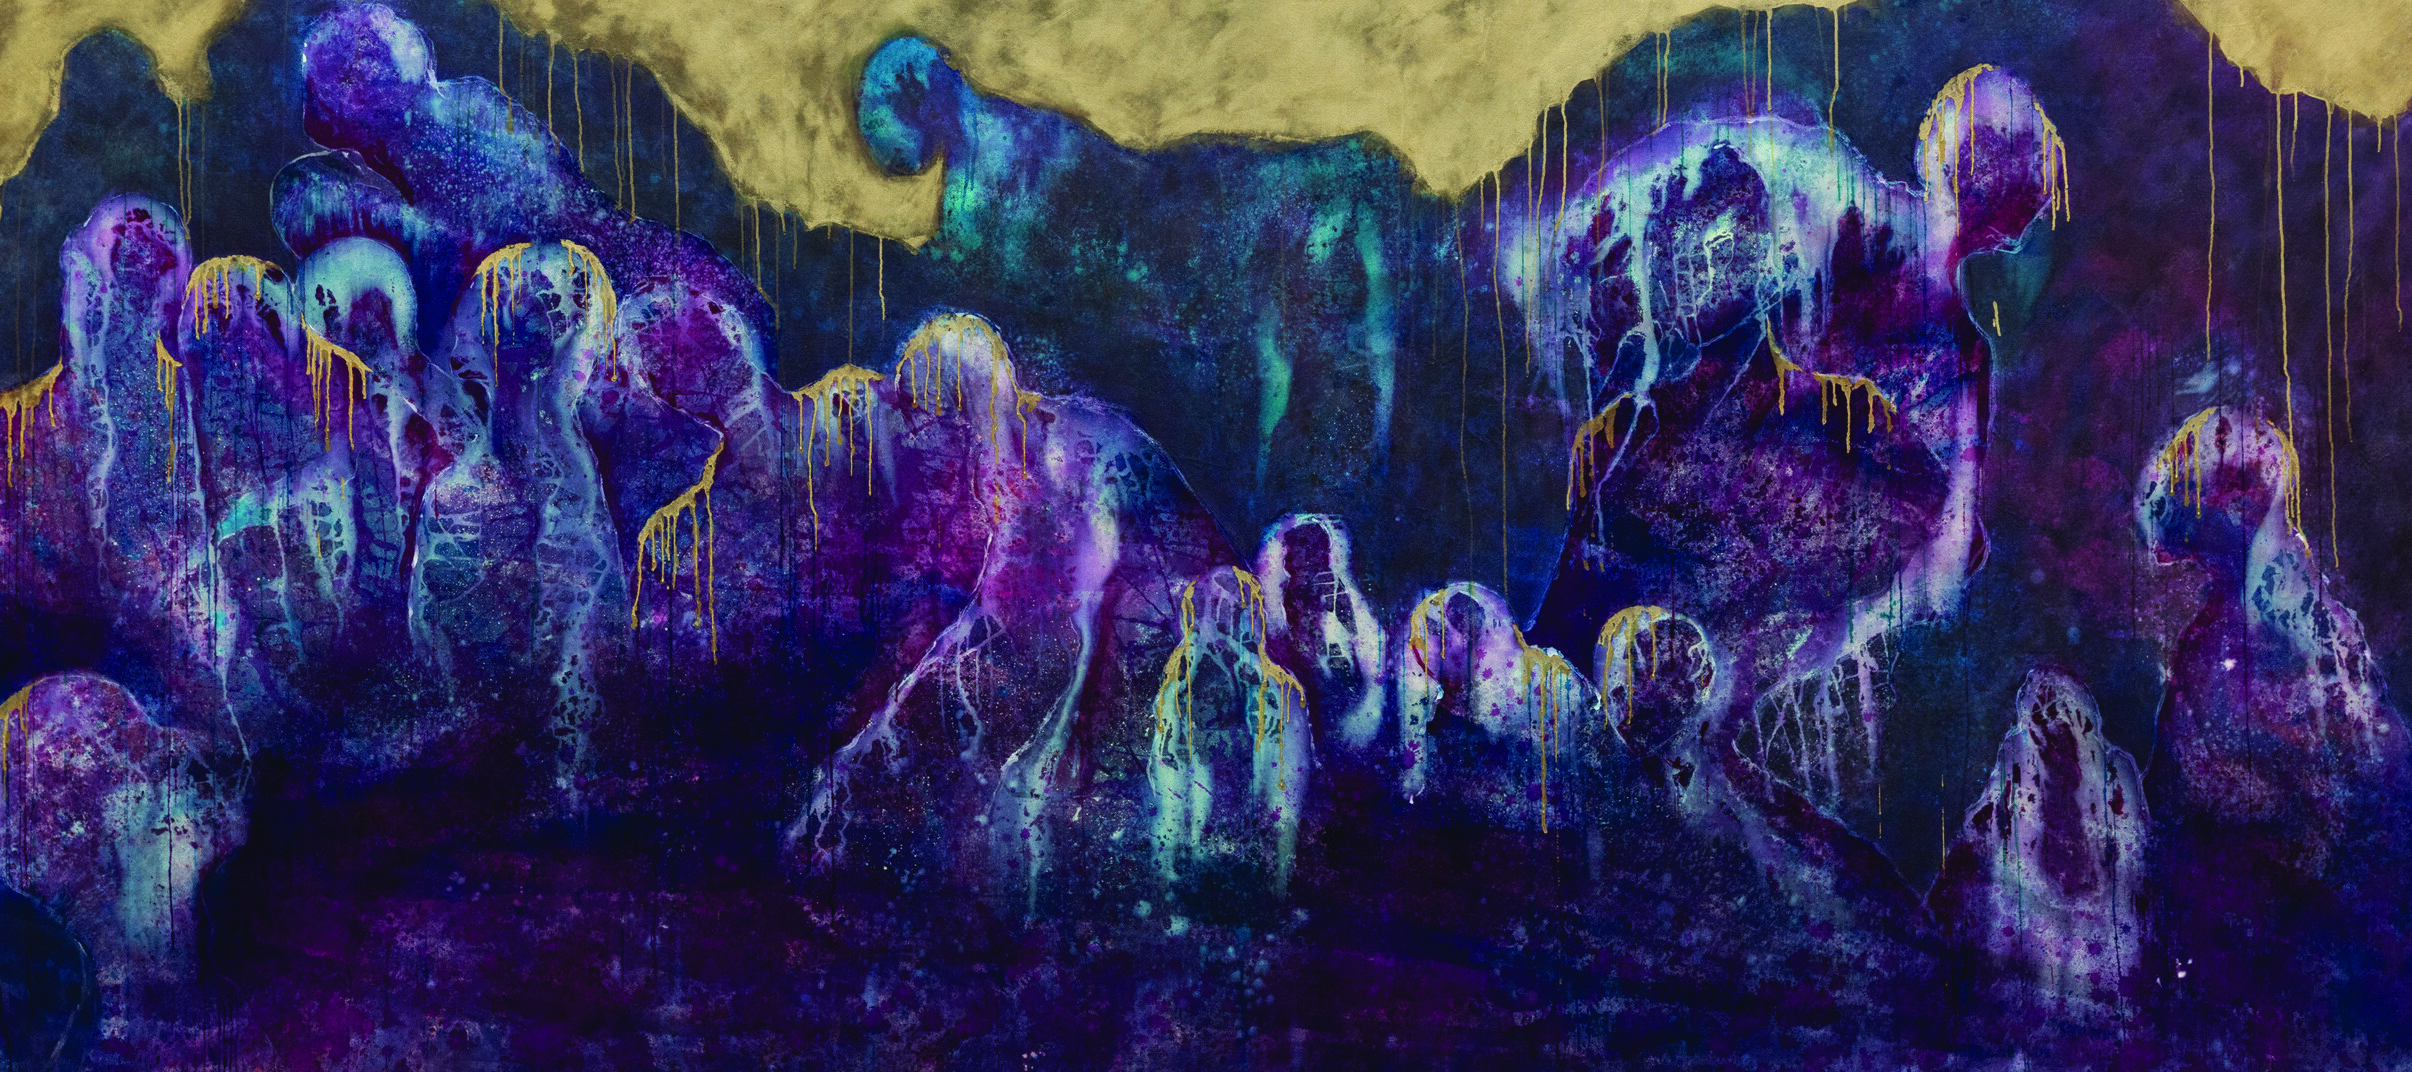 An abstract painting with purple-toned human-like figures against a gold backdrop with dark mountainous forms.